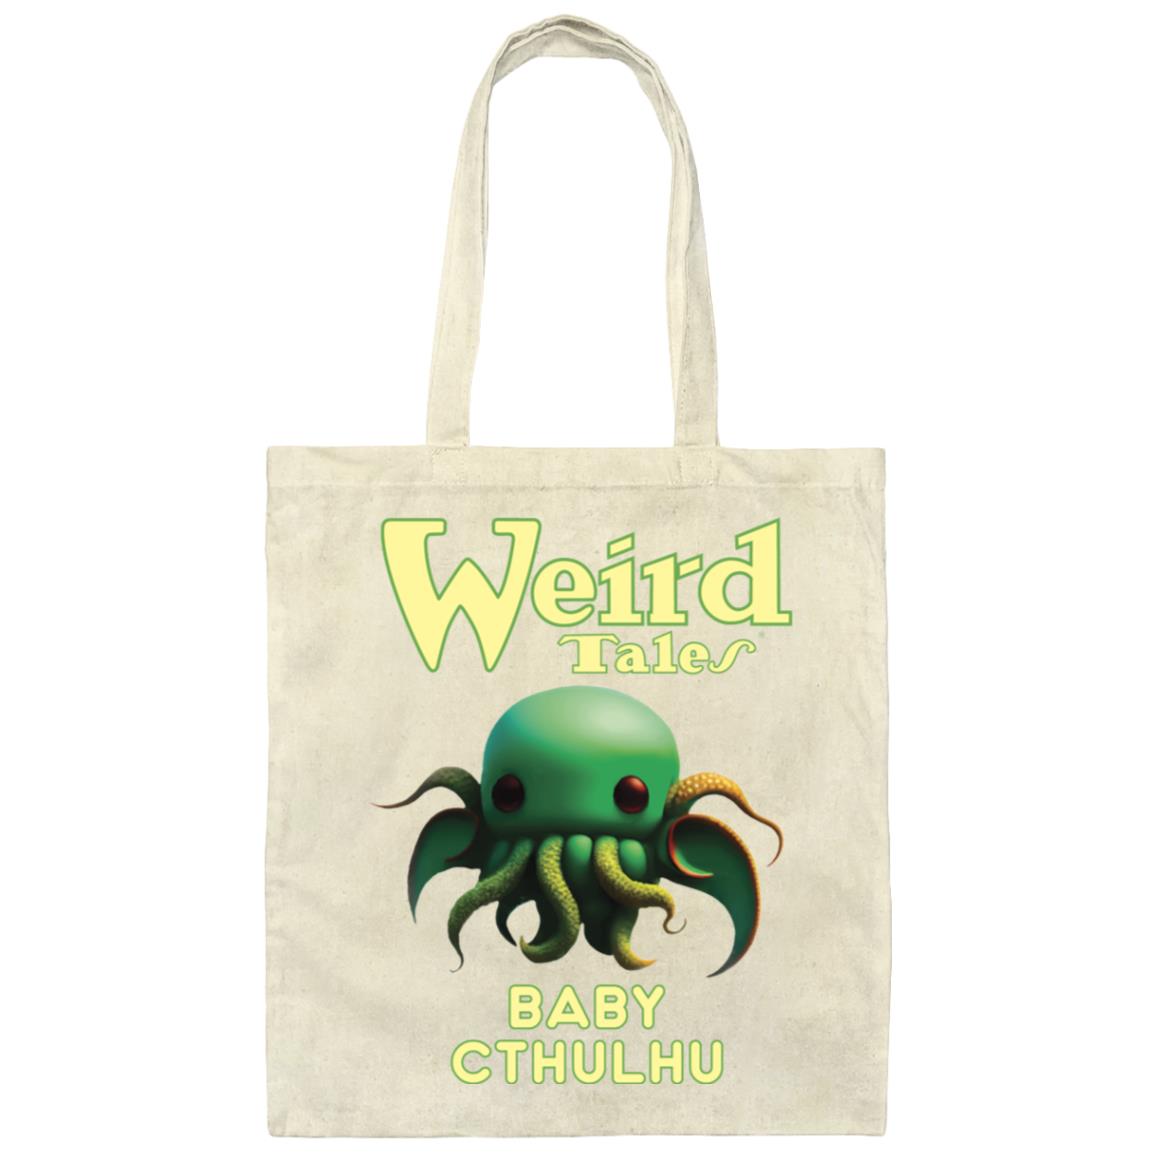 Weird Tales Baby Cthulhu Canvas Tote Bag